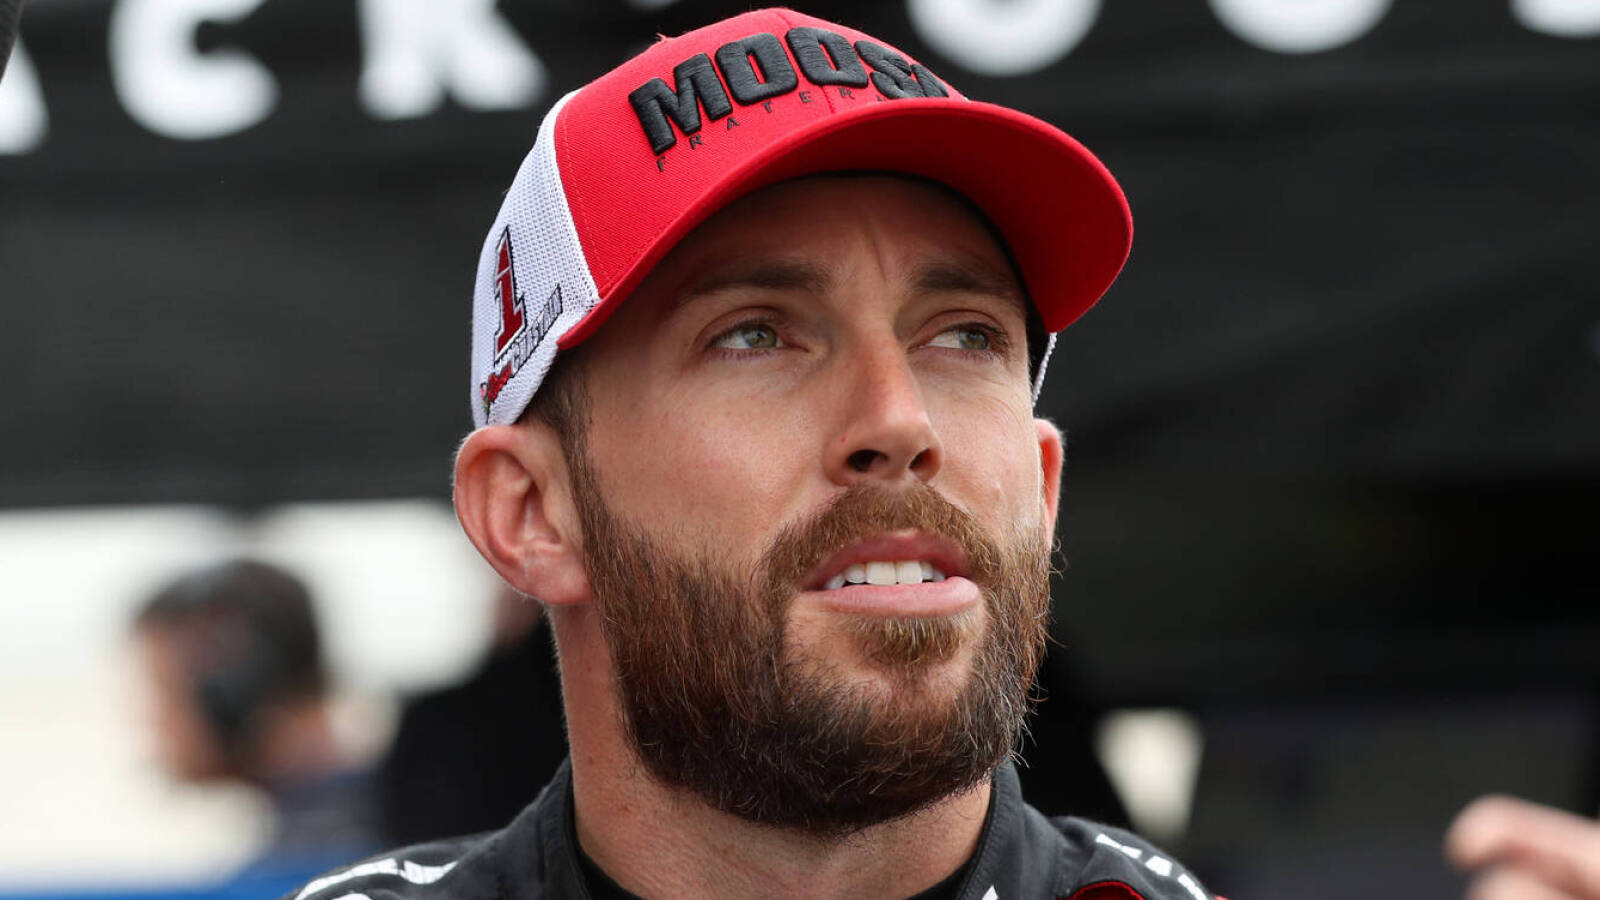 Ross Chastain uses late restart to win Truck Series race at Darlington